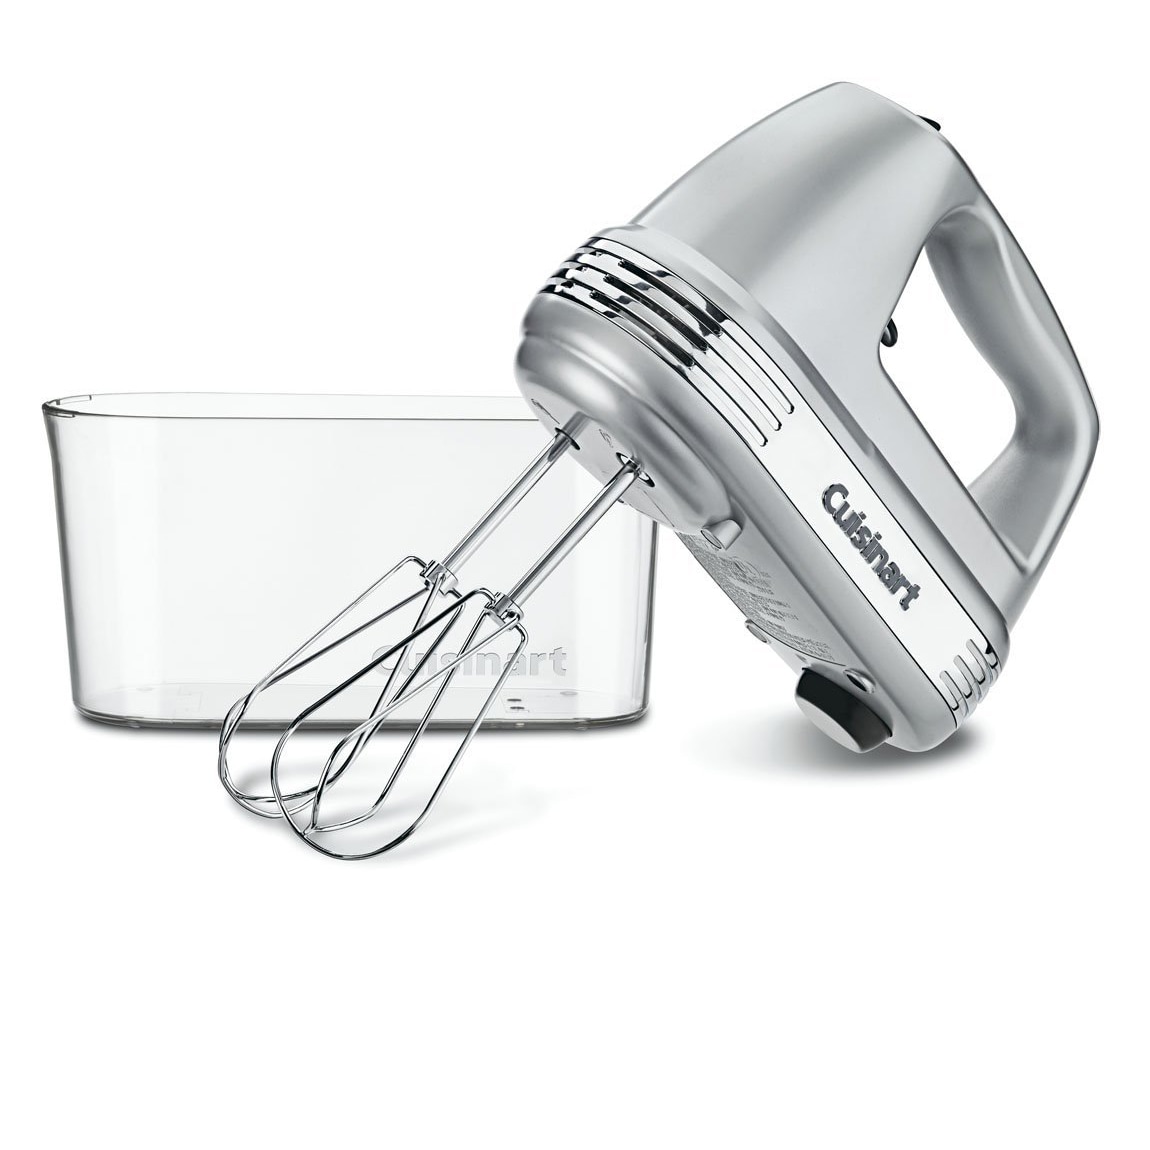 Department Store 1pc Steel Cooking Mixer; Whisk For Blending